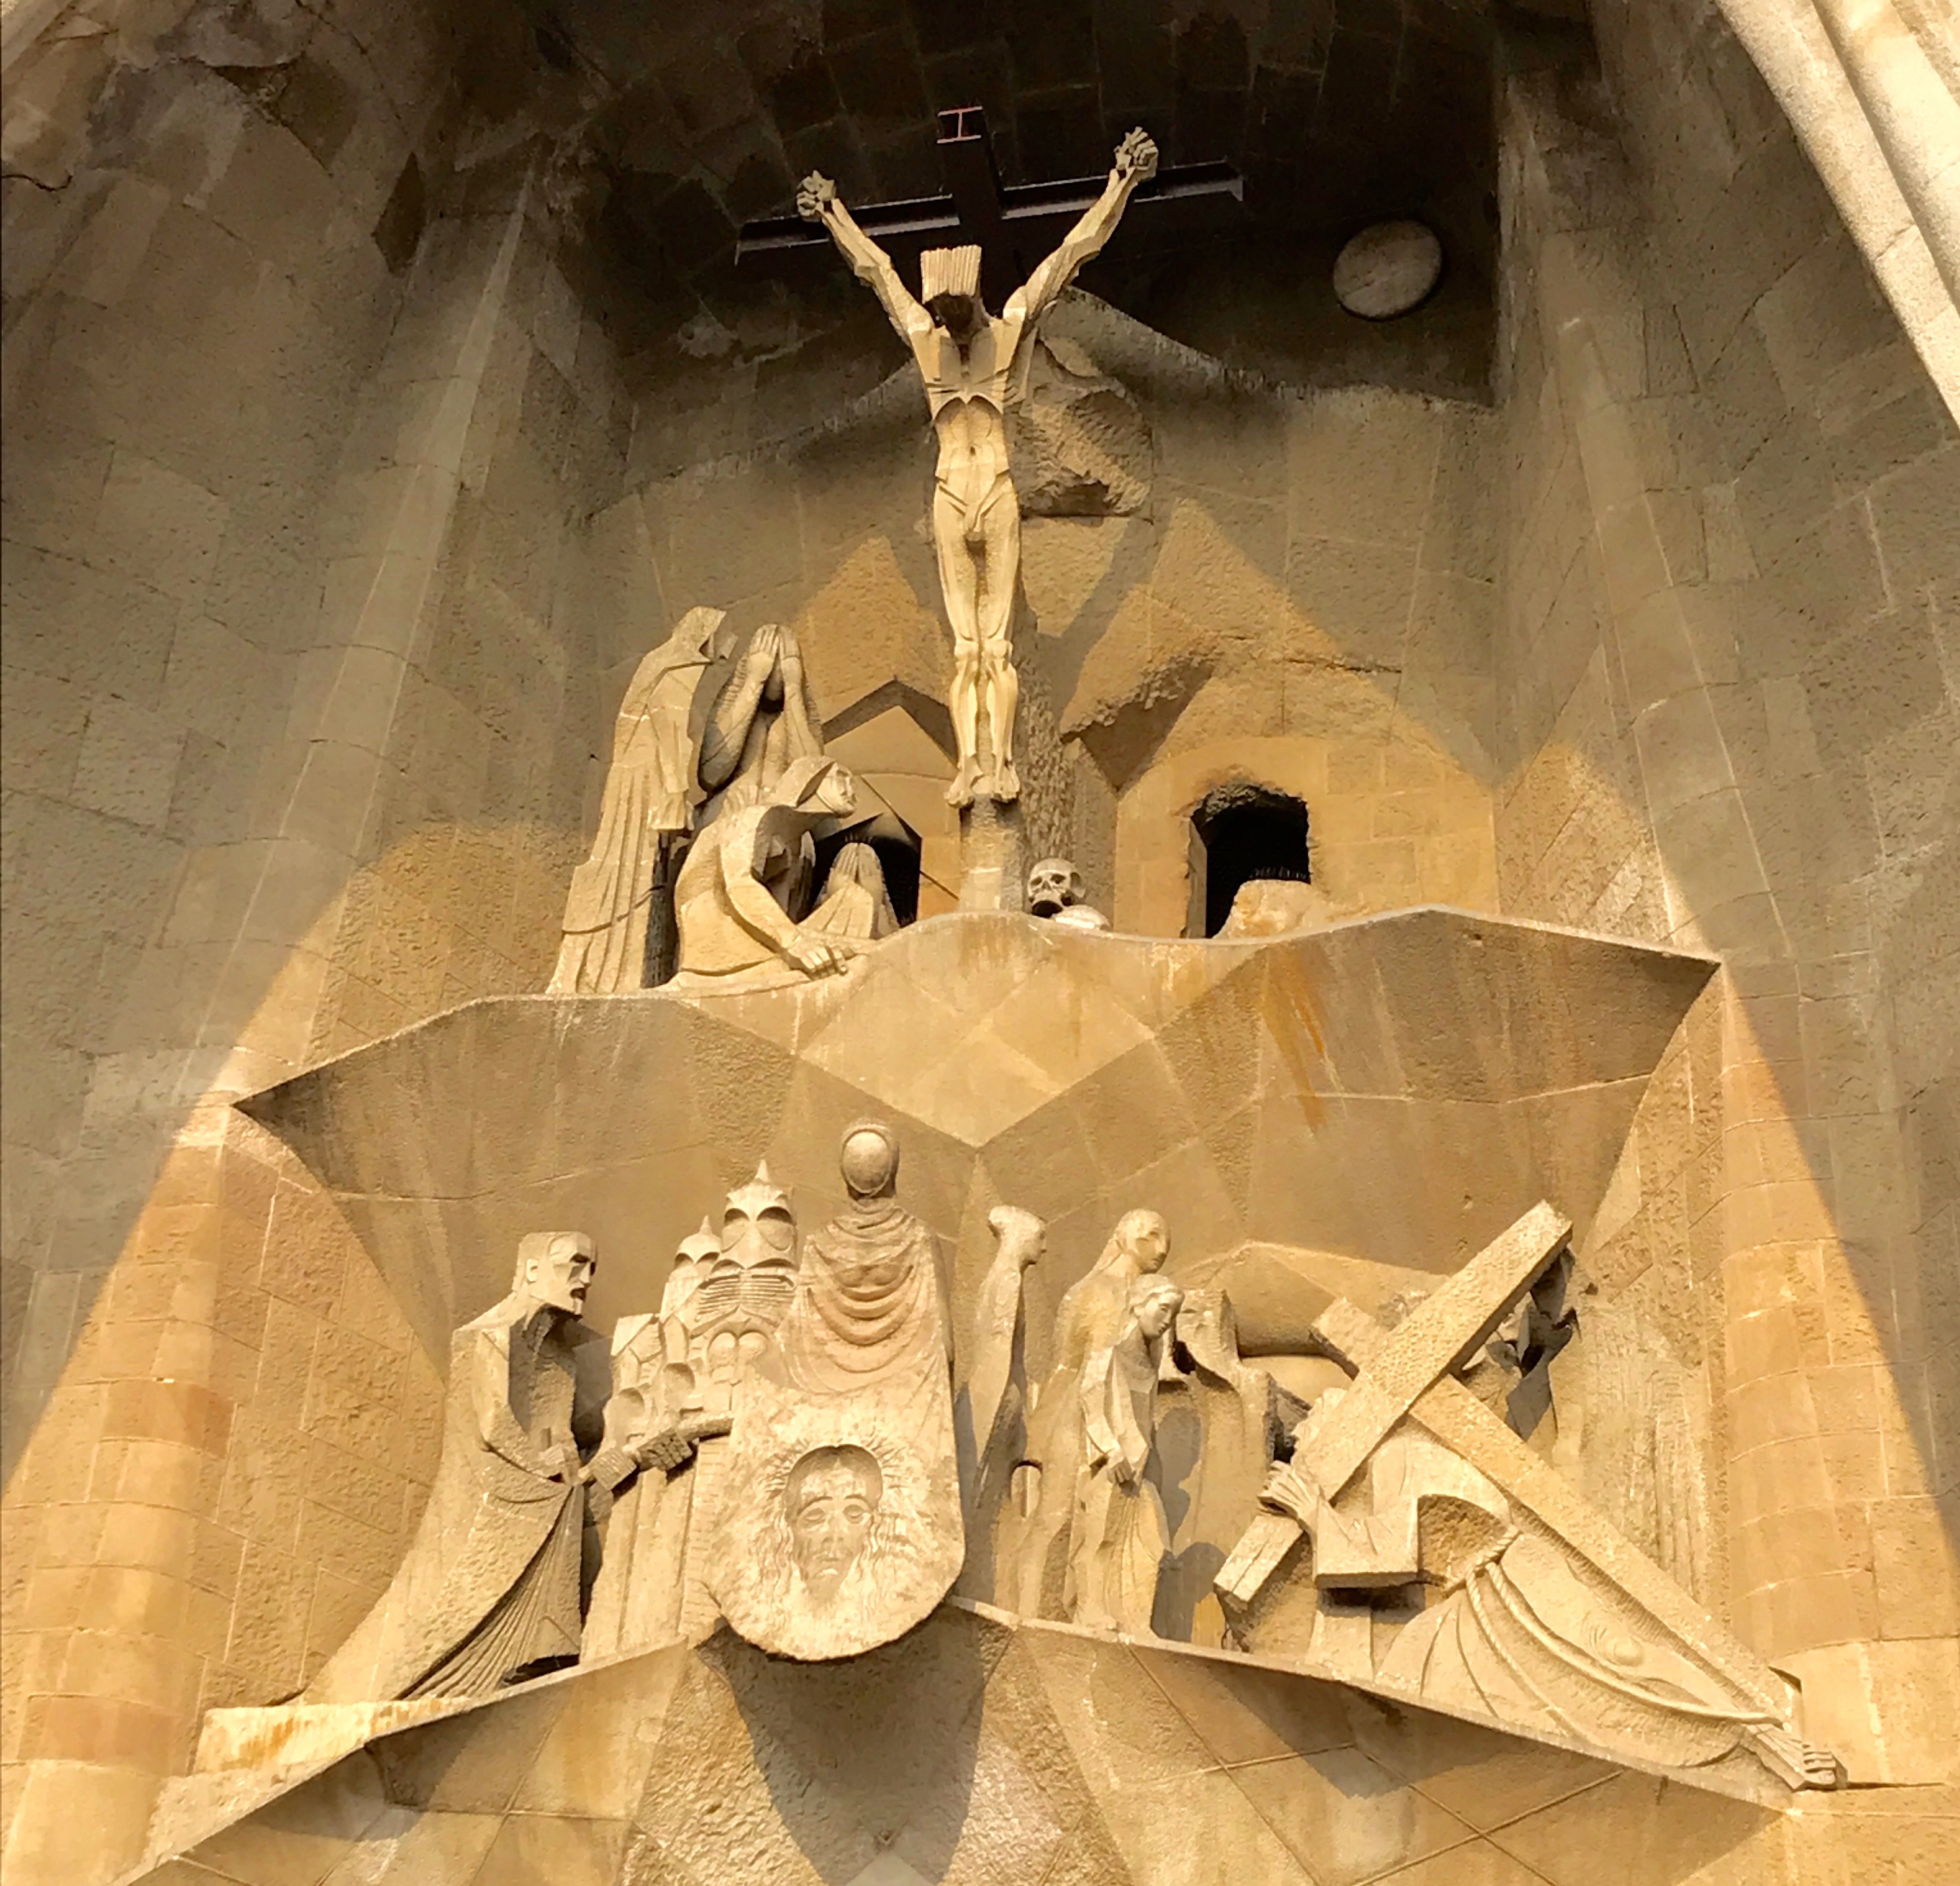 The Pasion Facade includes a haunting portrayal of the crucifixion. Gaudí himself appears in the lower left portion of the scene.